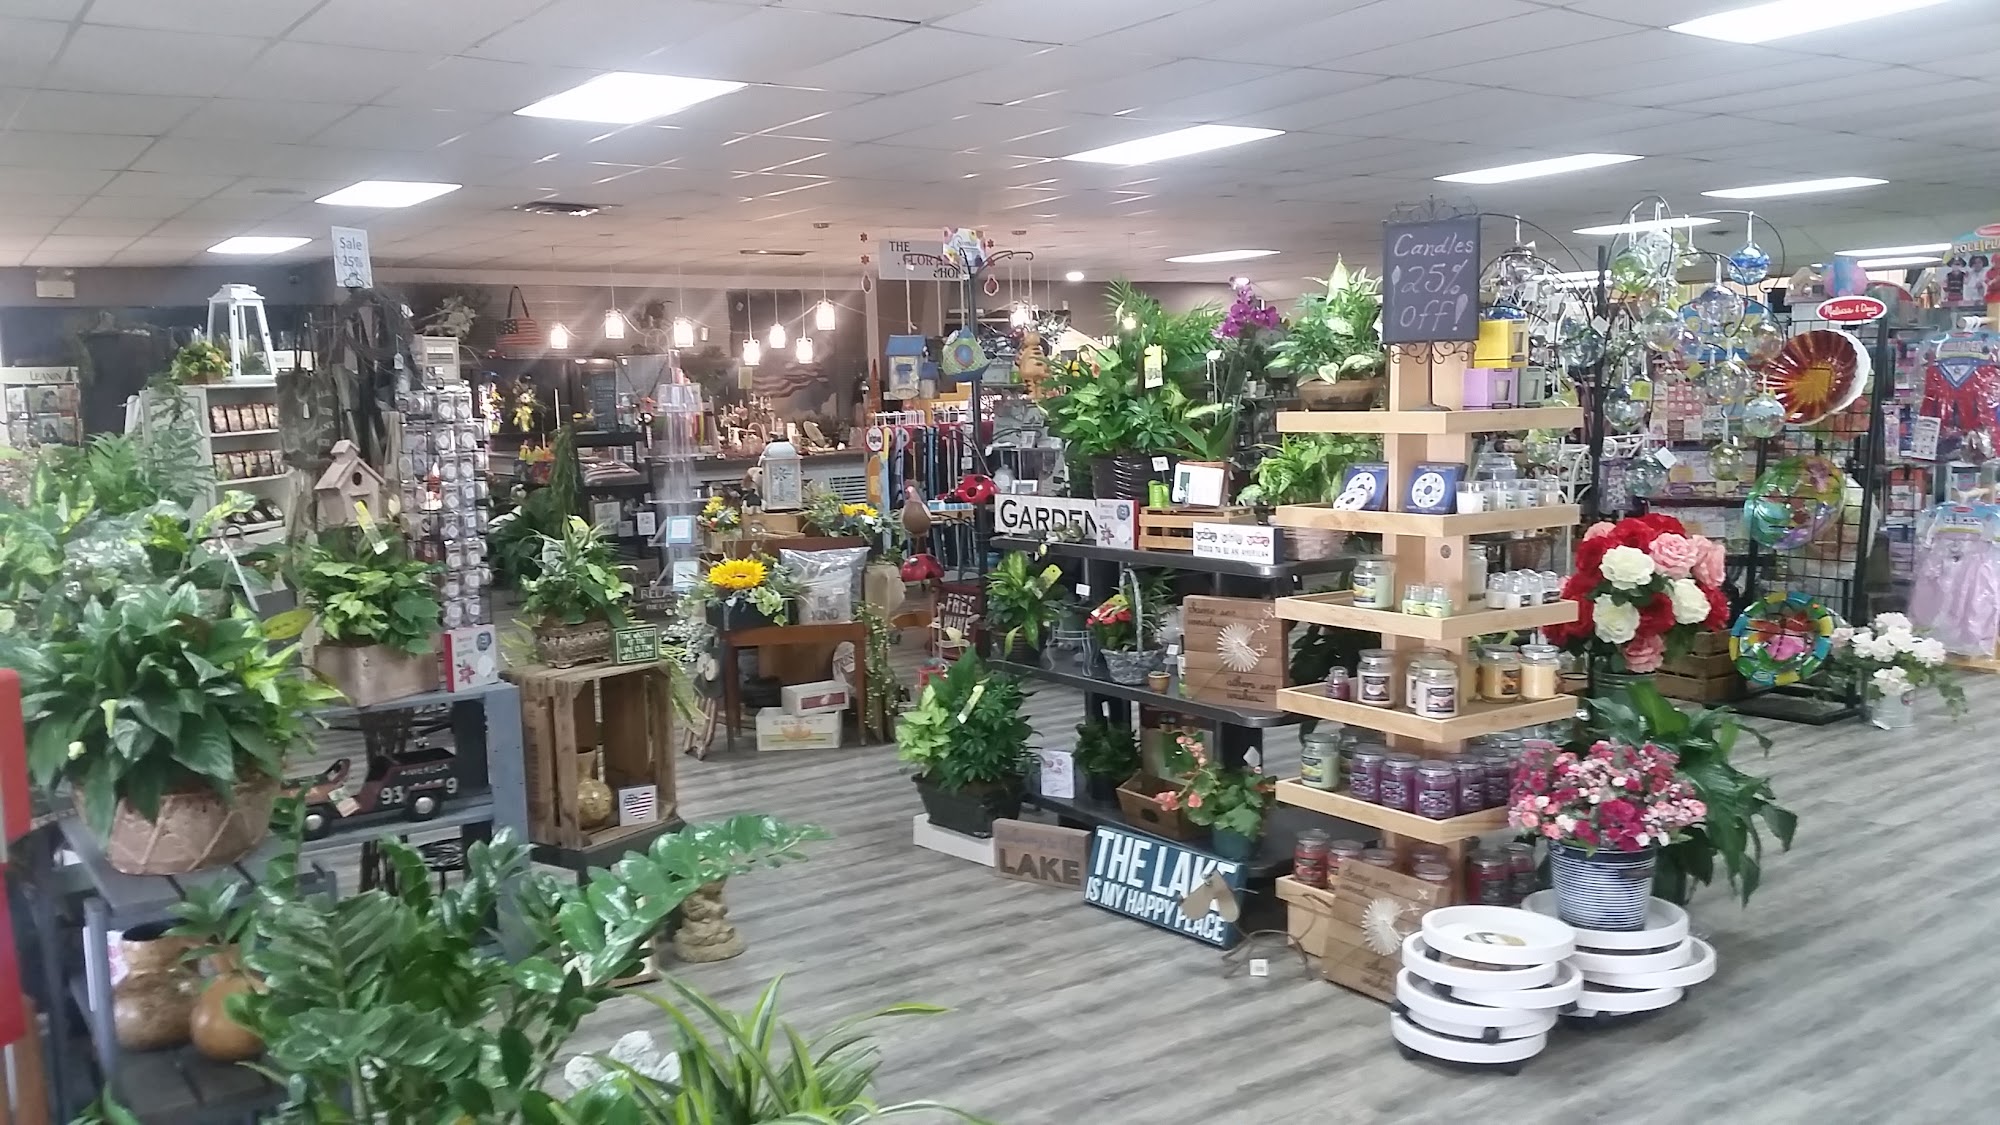 The Floral Shop at Healey's Home Center